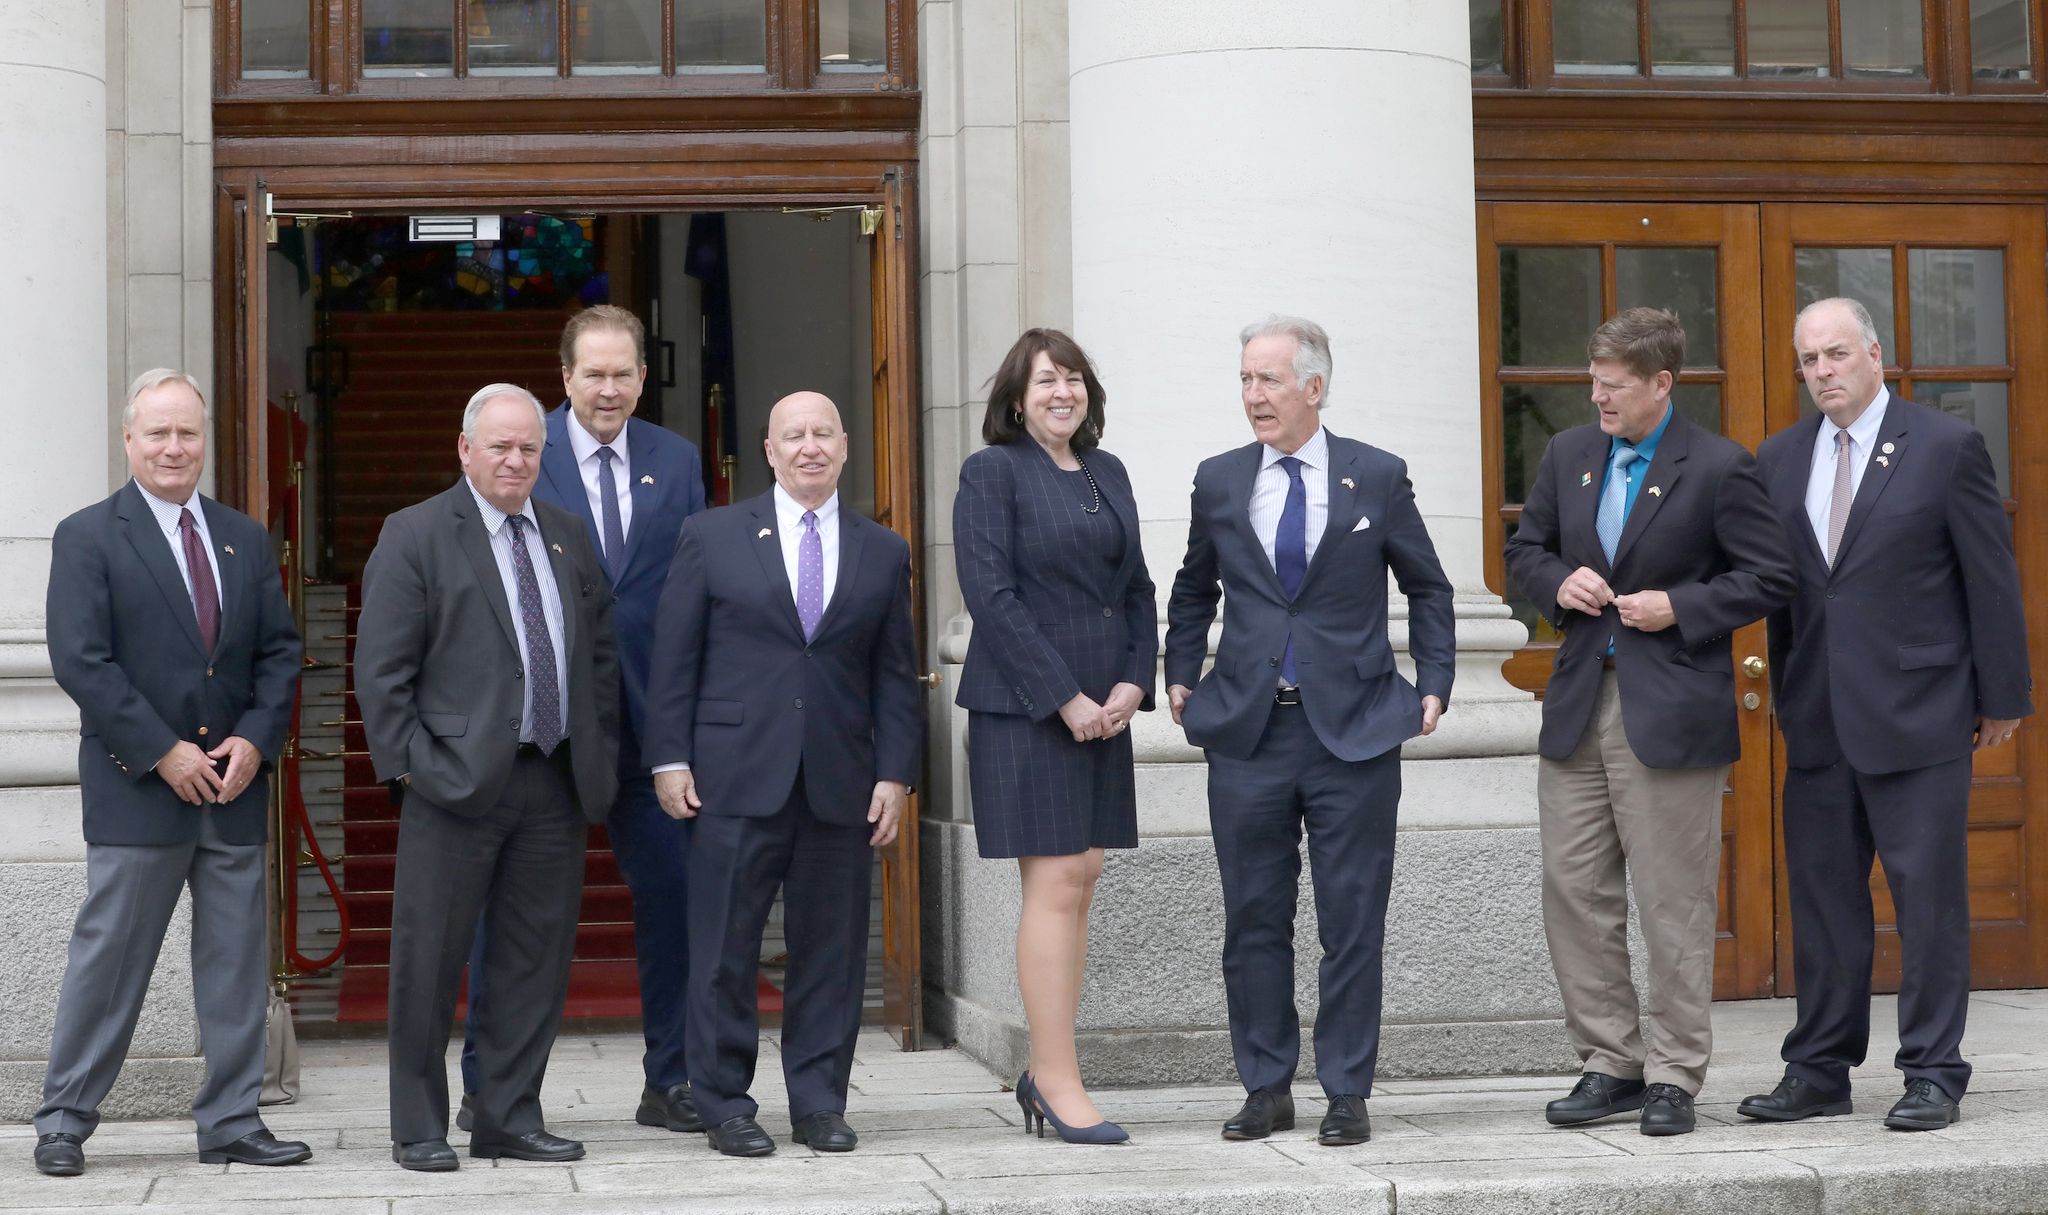 IN TOWN: The US delegation led by Richie Neal, third right, arrives in Dublin this week